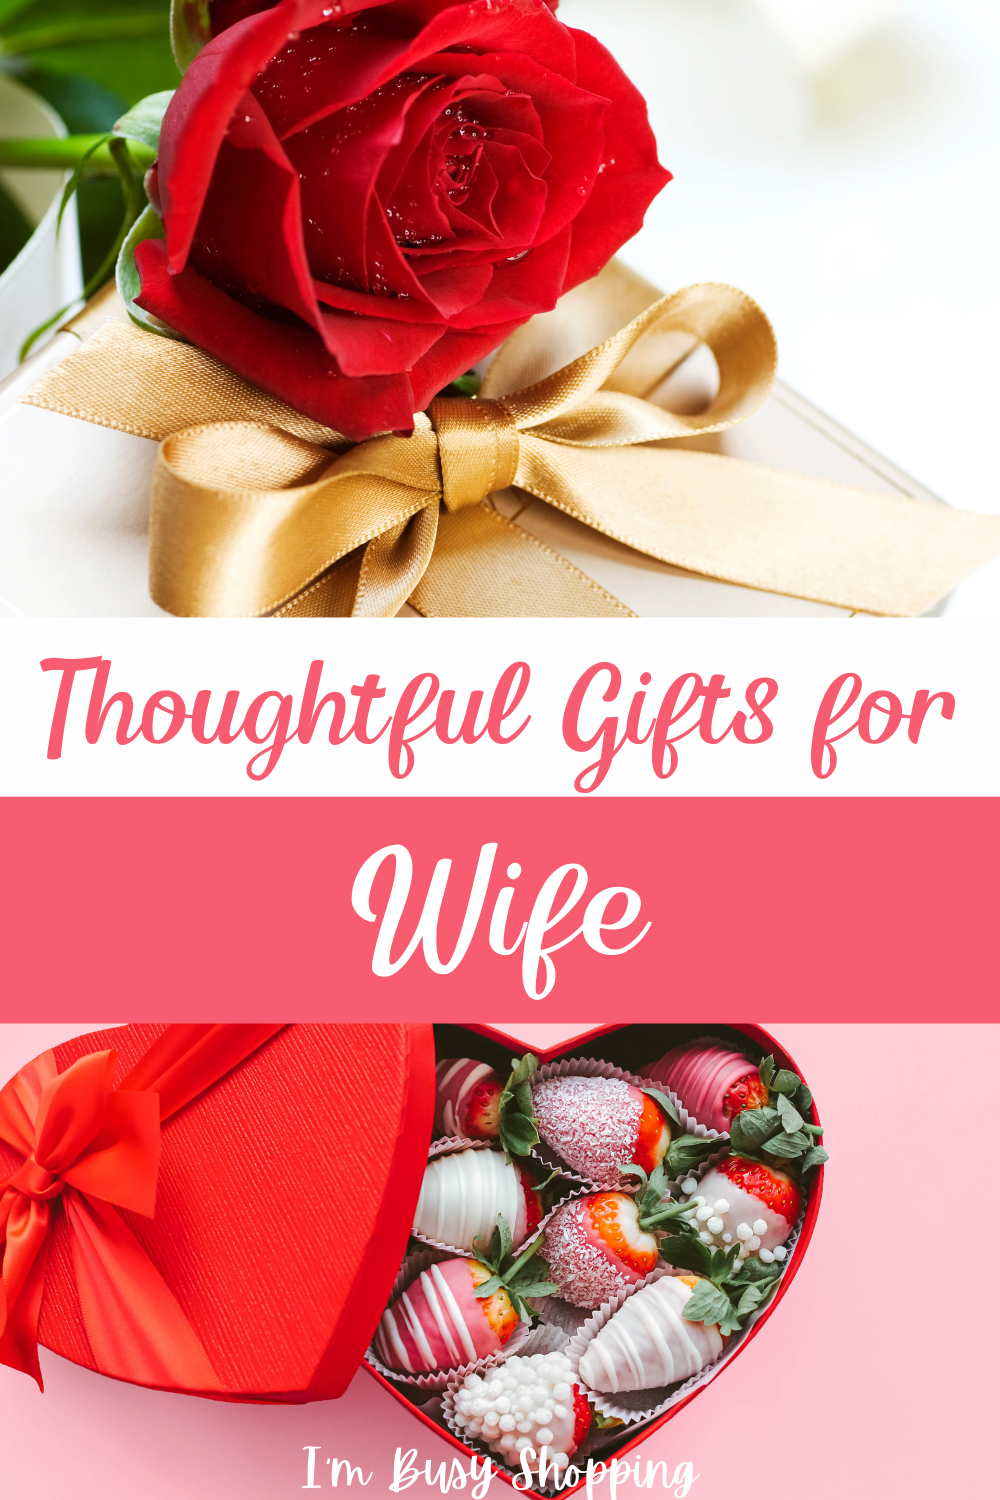 Pin showing thoughtful gifts for wife